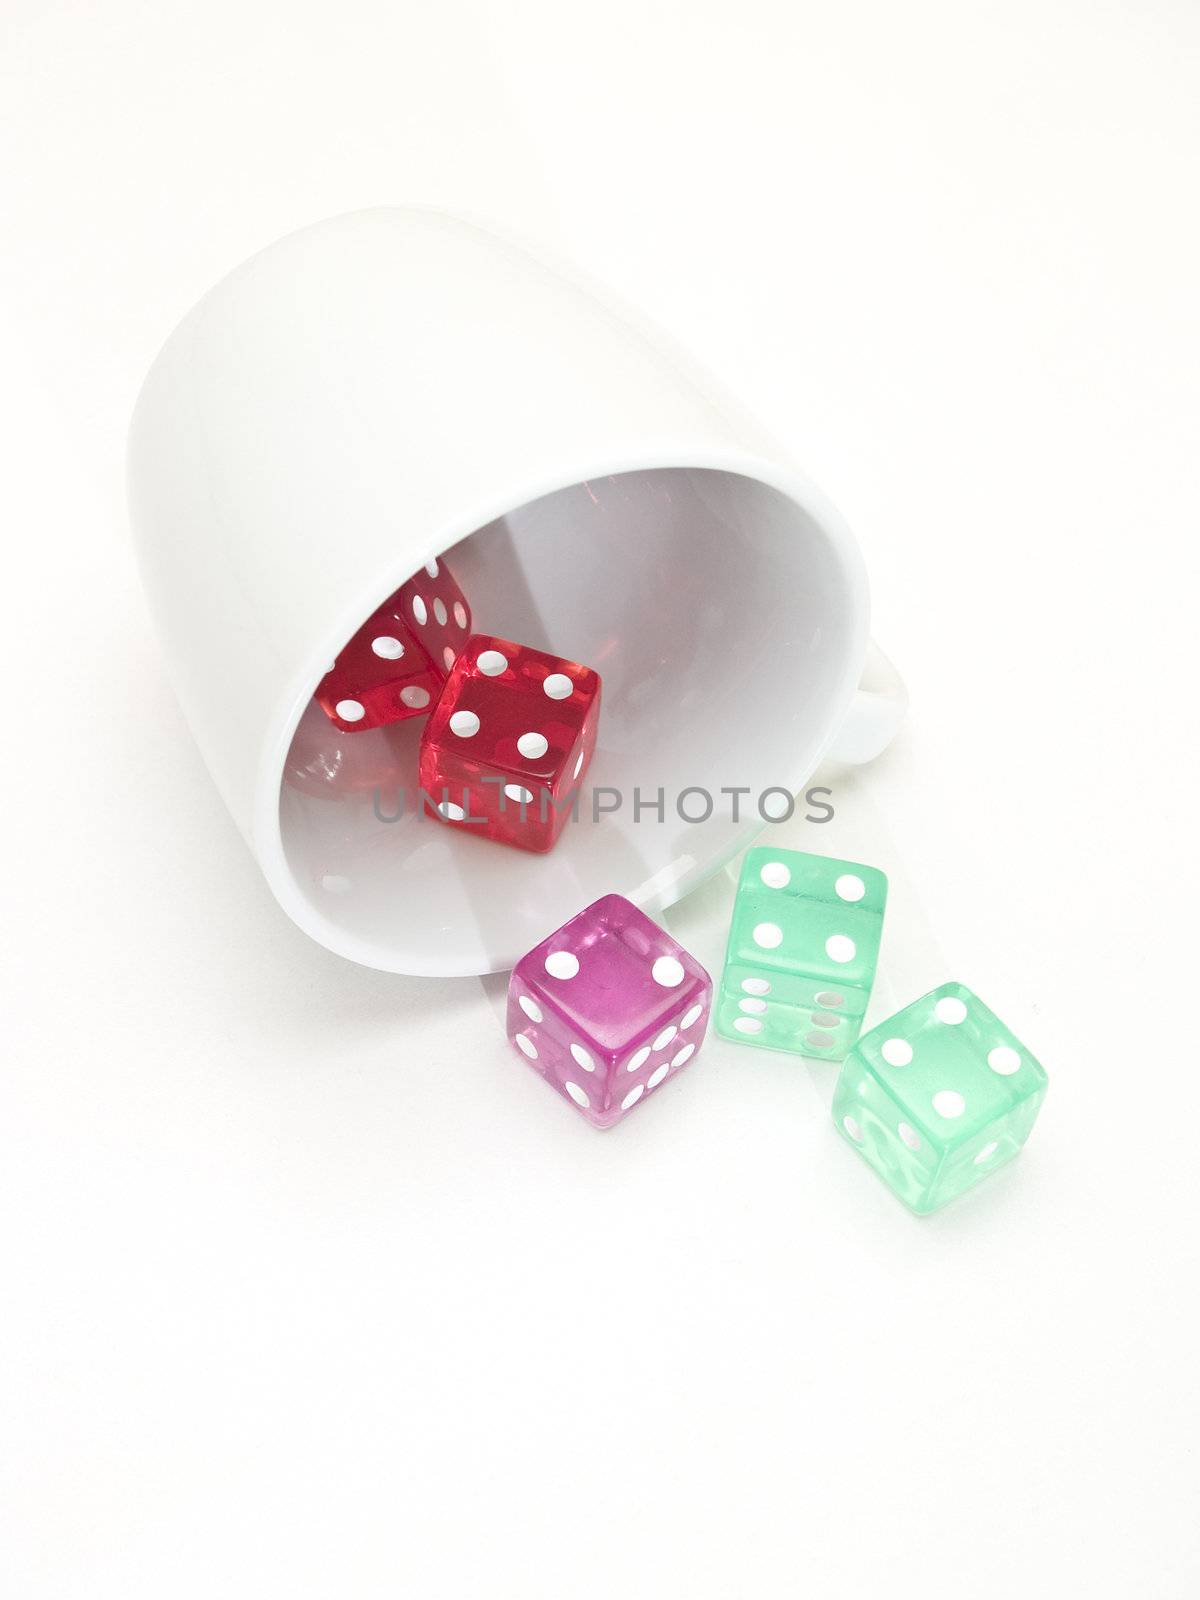  cup and dice by lauria